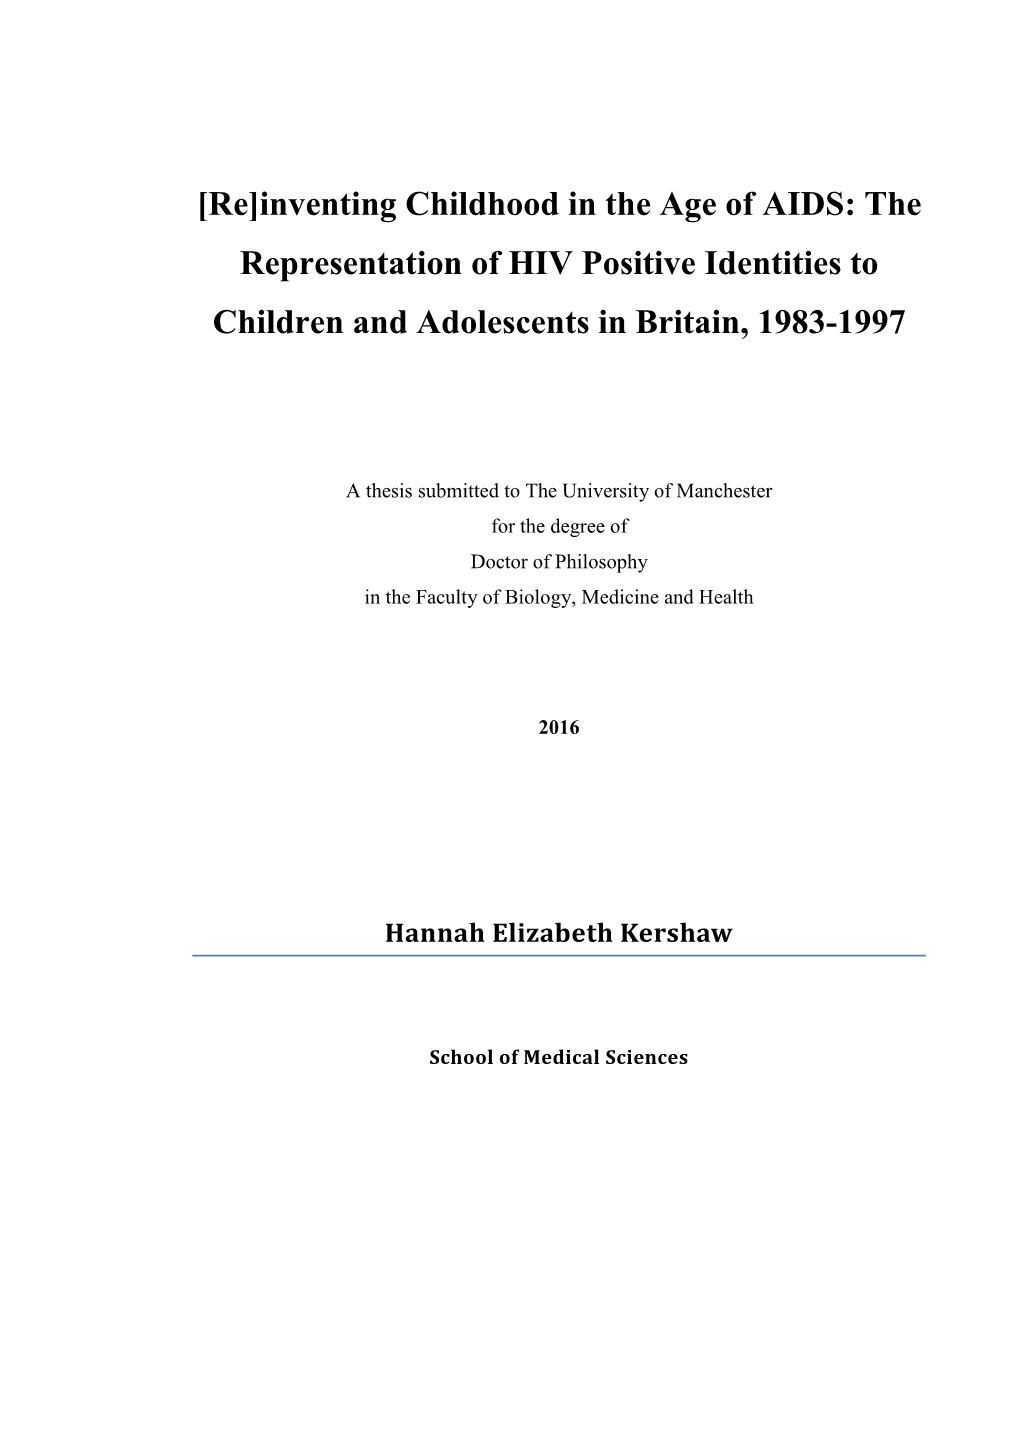 The Representation of HIV Positive Identities to Children and Adolescents in Britain, 1983-1997